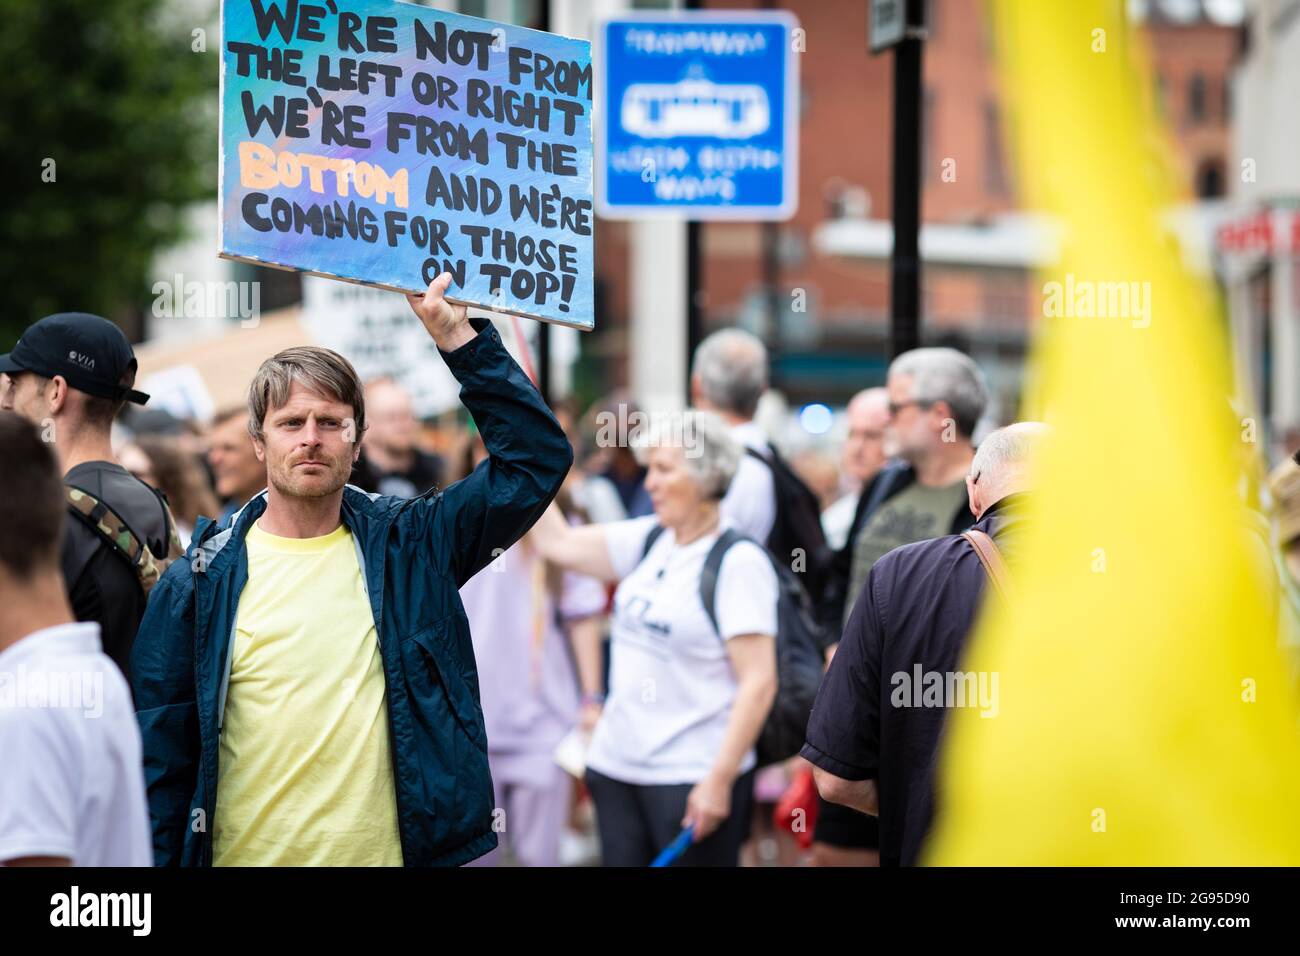 Manchester, UK. 24th July, 2021. A man with a placard joins the protesters against the lockdowns. People march through Piccadilly for a global Worldwide Rally For Freedom demonstration. Credit: Andy Barton/Alamy Live News Stock Photo